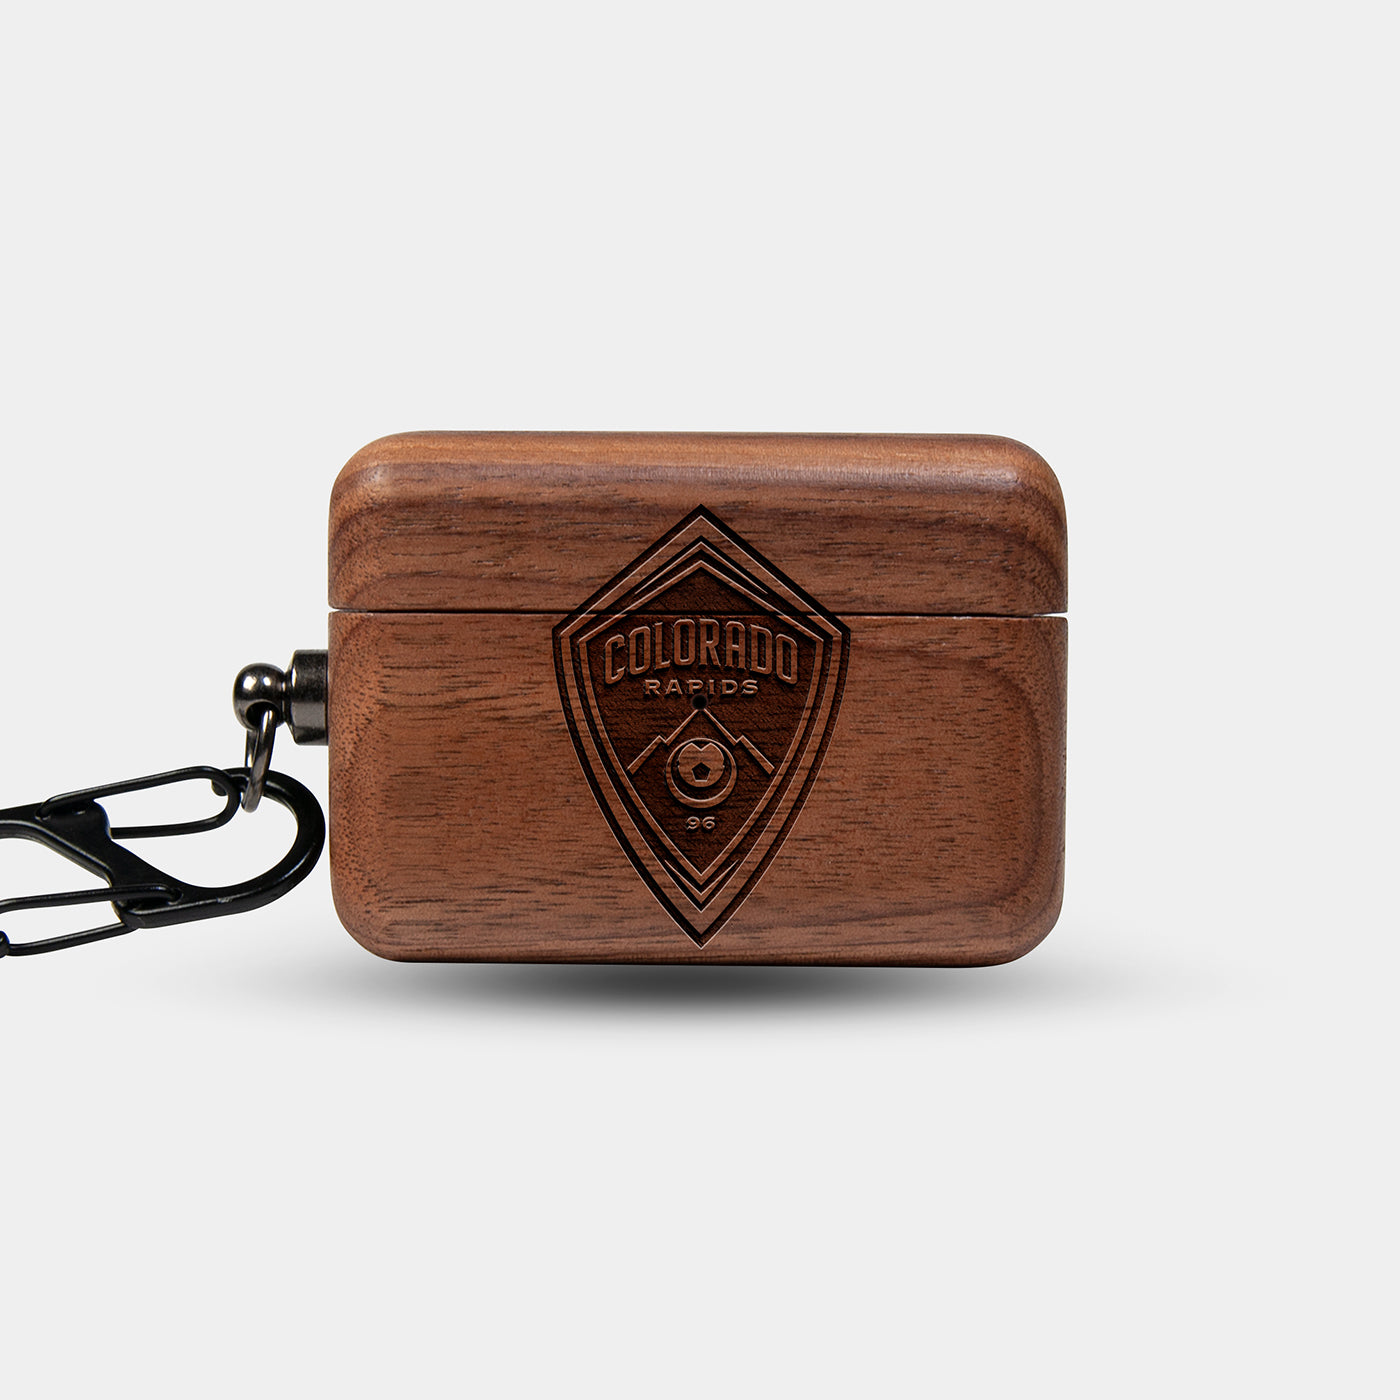 Custom Colorado Rapids AirPods Cases | AirPods | AirPods Pro | AirPods Pro 2 Case - Carved Wood Colorado Rapids AirPods Cover - Eco-friendly Colorado Rapids AirPods Case - Custom Colorado Rapids Gift For Him - Monogrammed Personalized AirPods Cover By Engraved In Nature